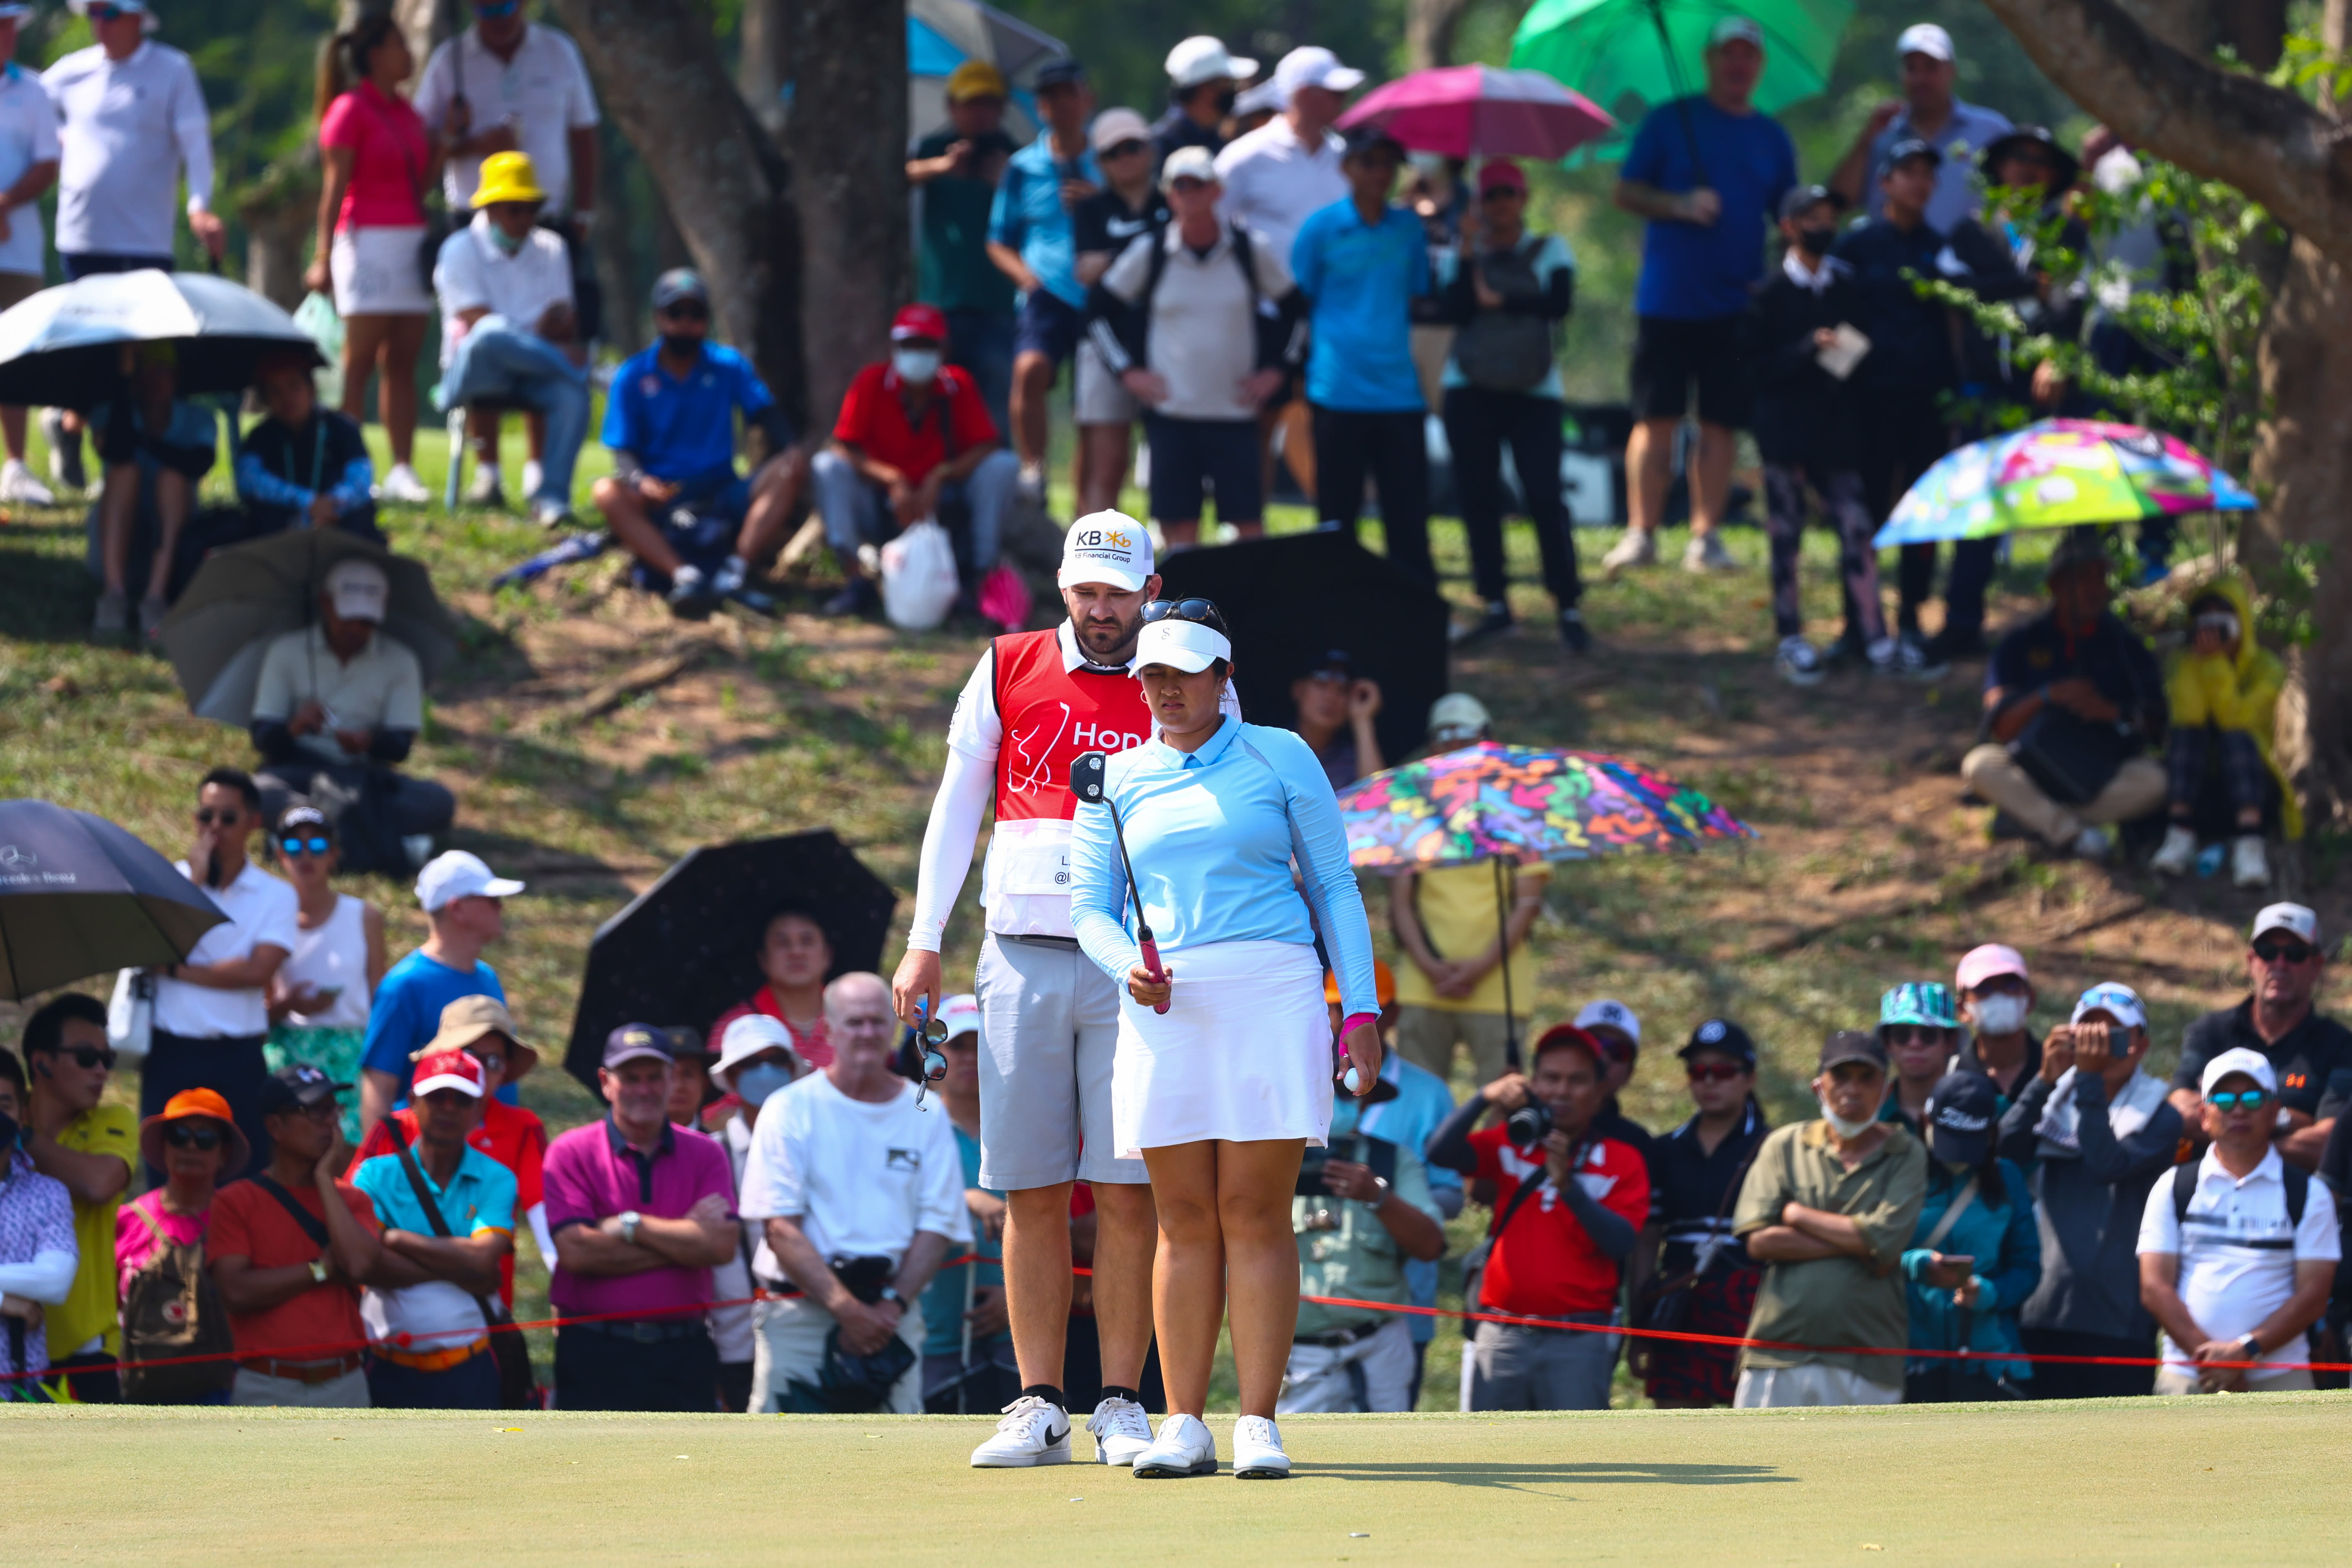 Lilia Vu won for the first time on the LPGA Tour with a one-stroke victory in Thailand on Feb. 26. (Getty Images)